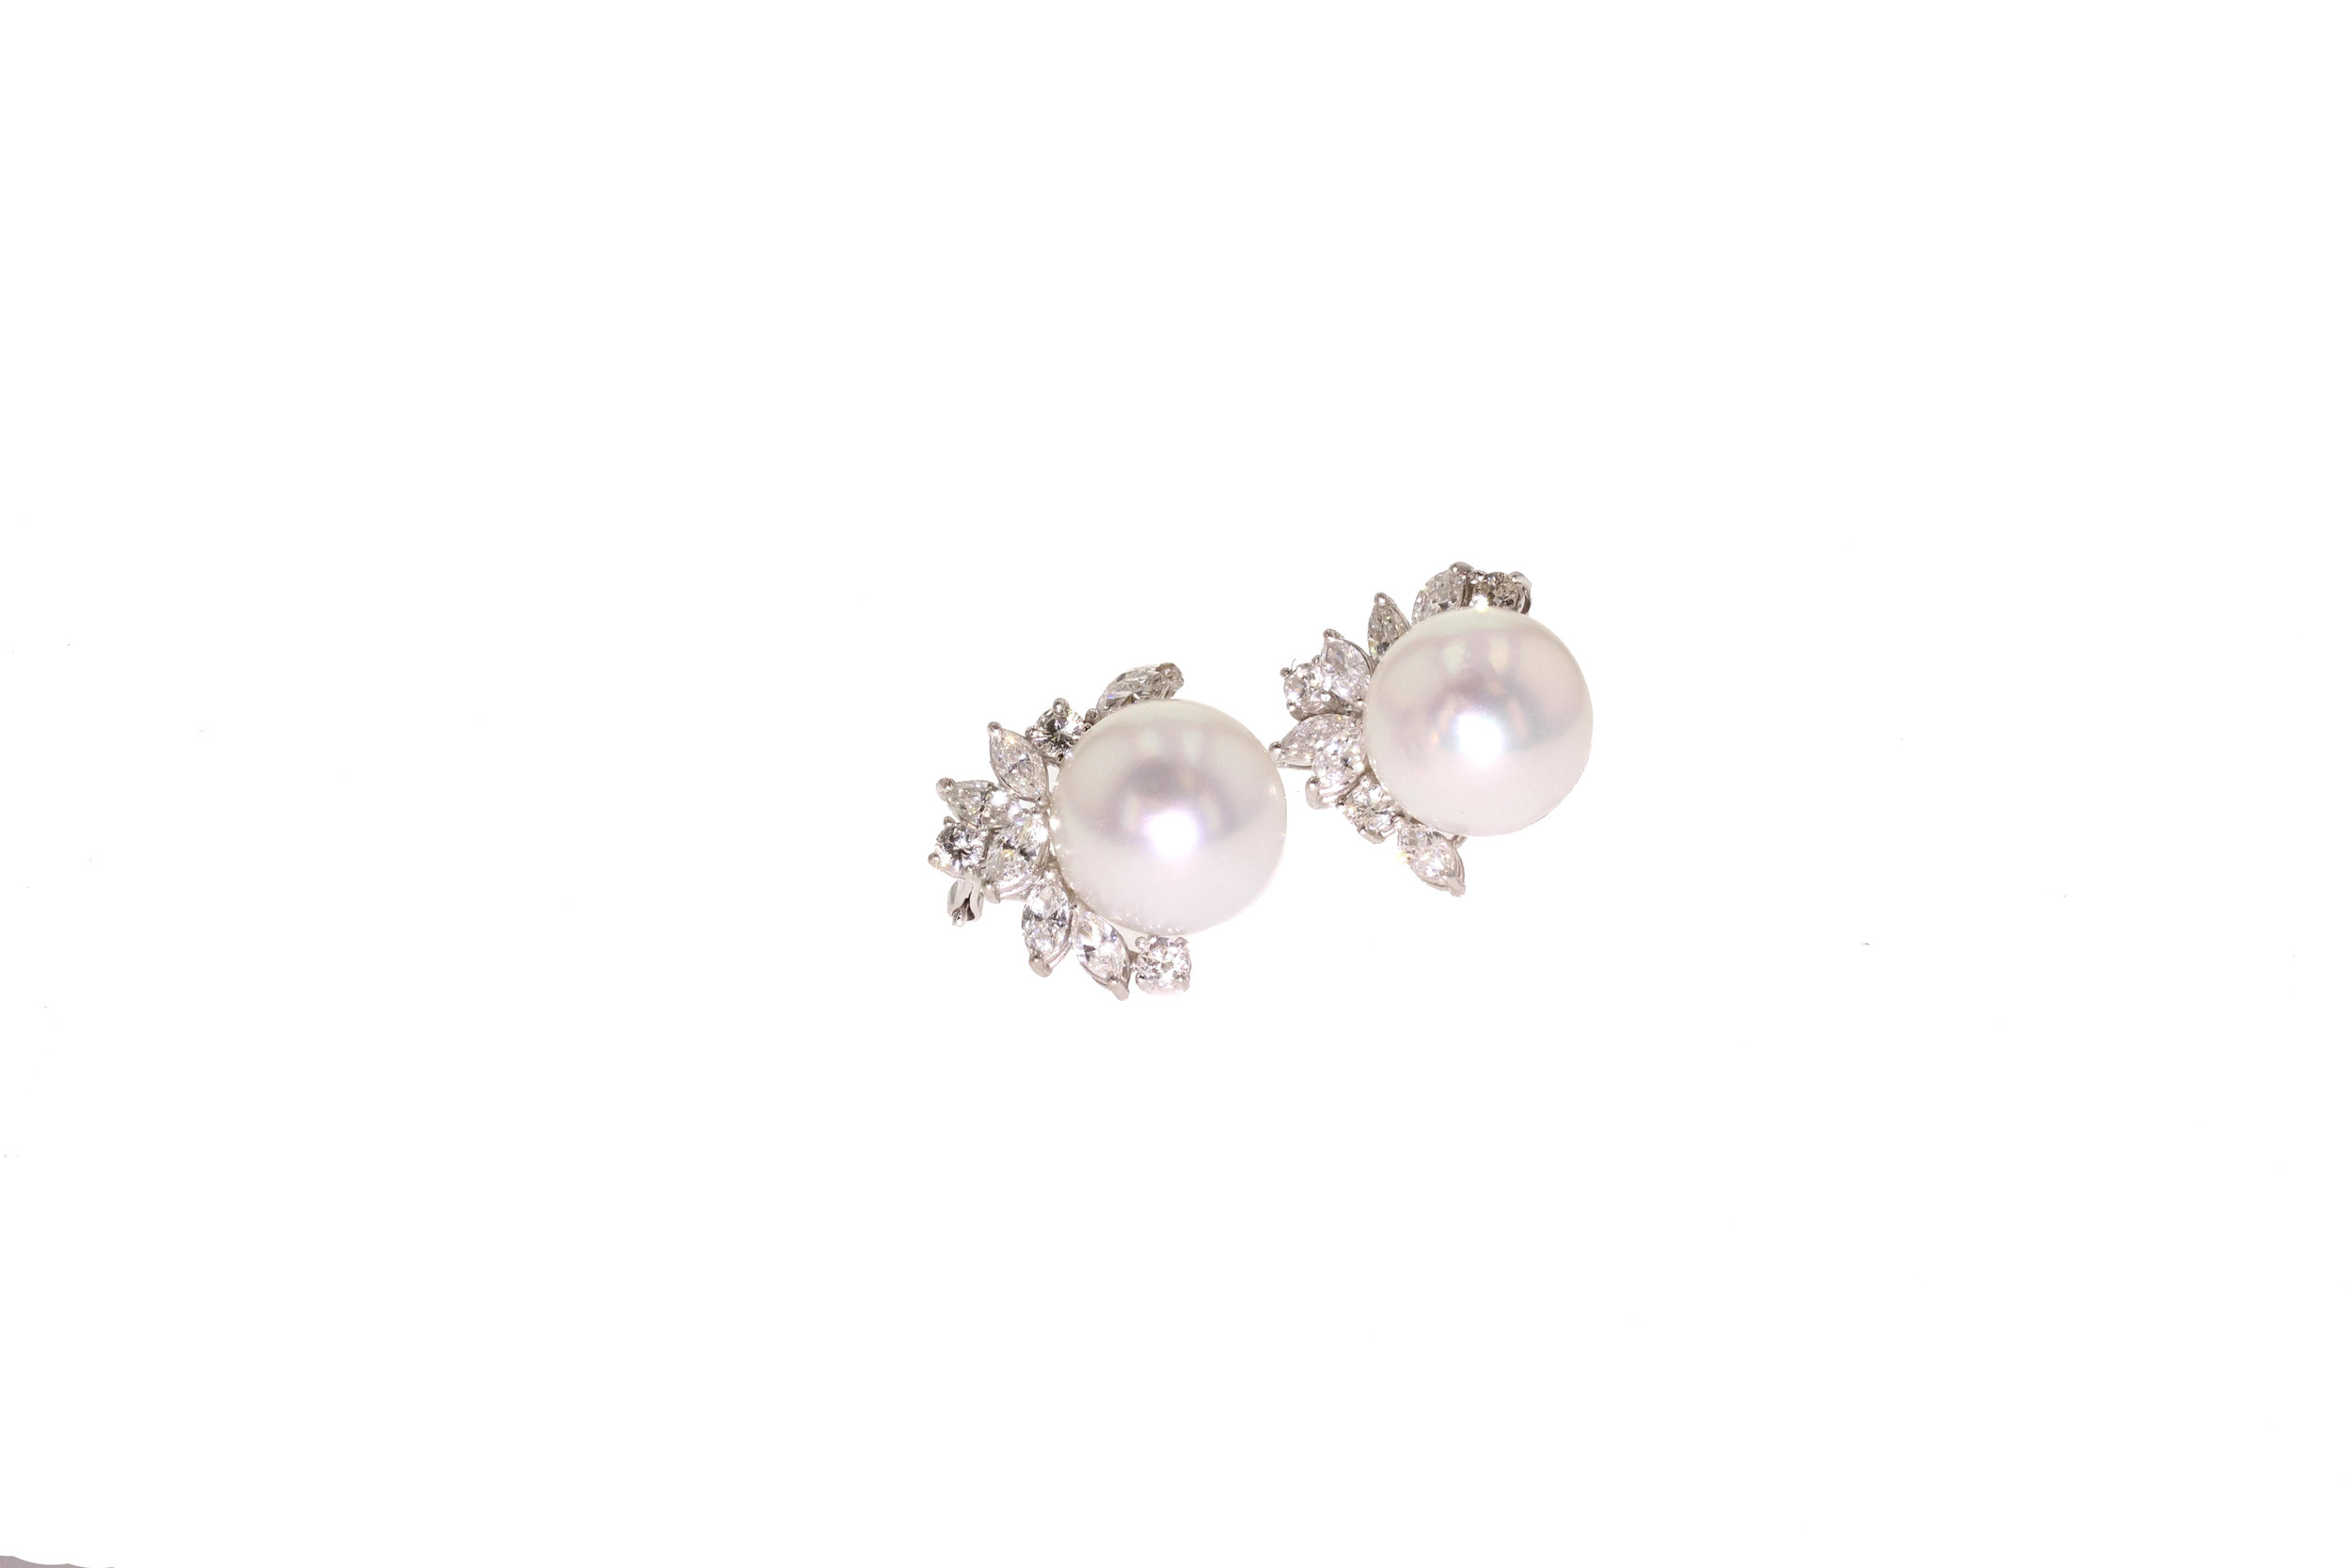 15mm South Sea Pearl and Diamond Earrings set in 18kt White Gold 4.00 tcw. $27,000